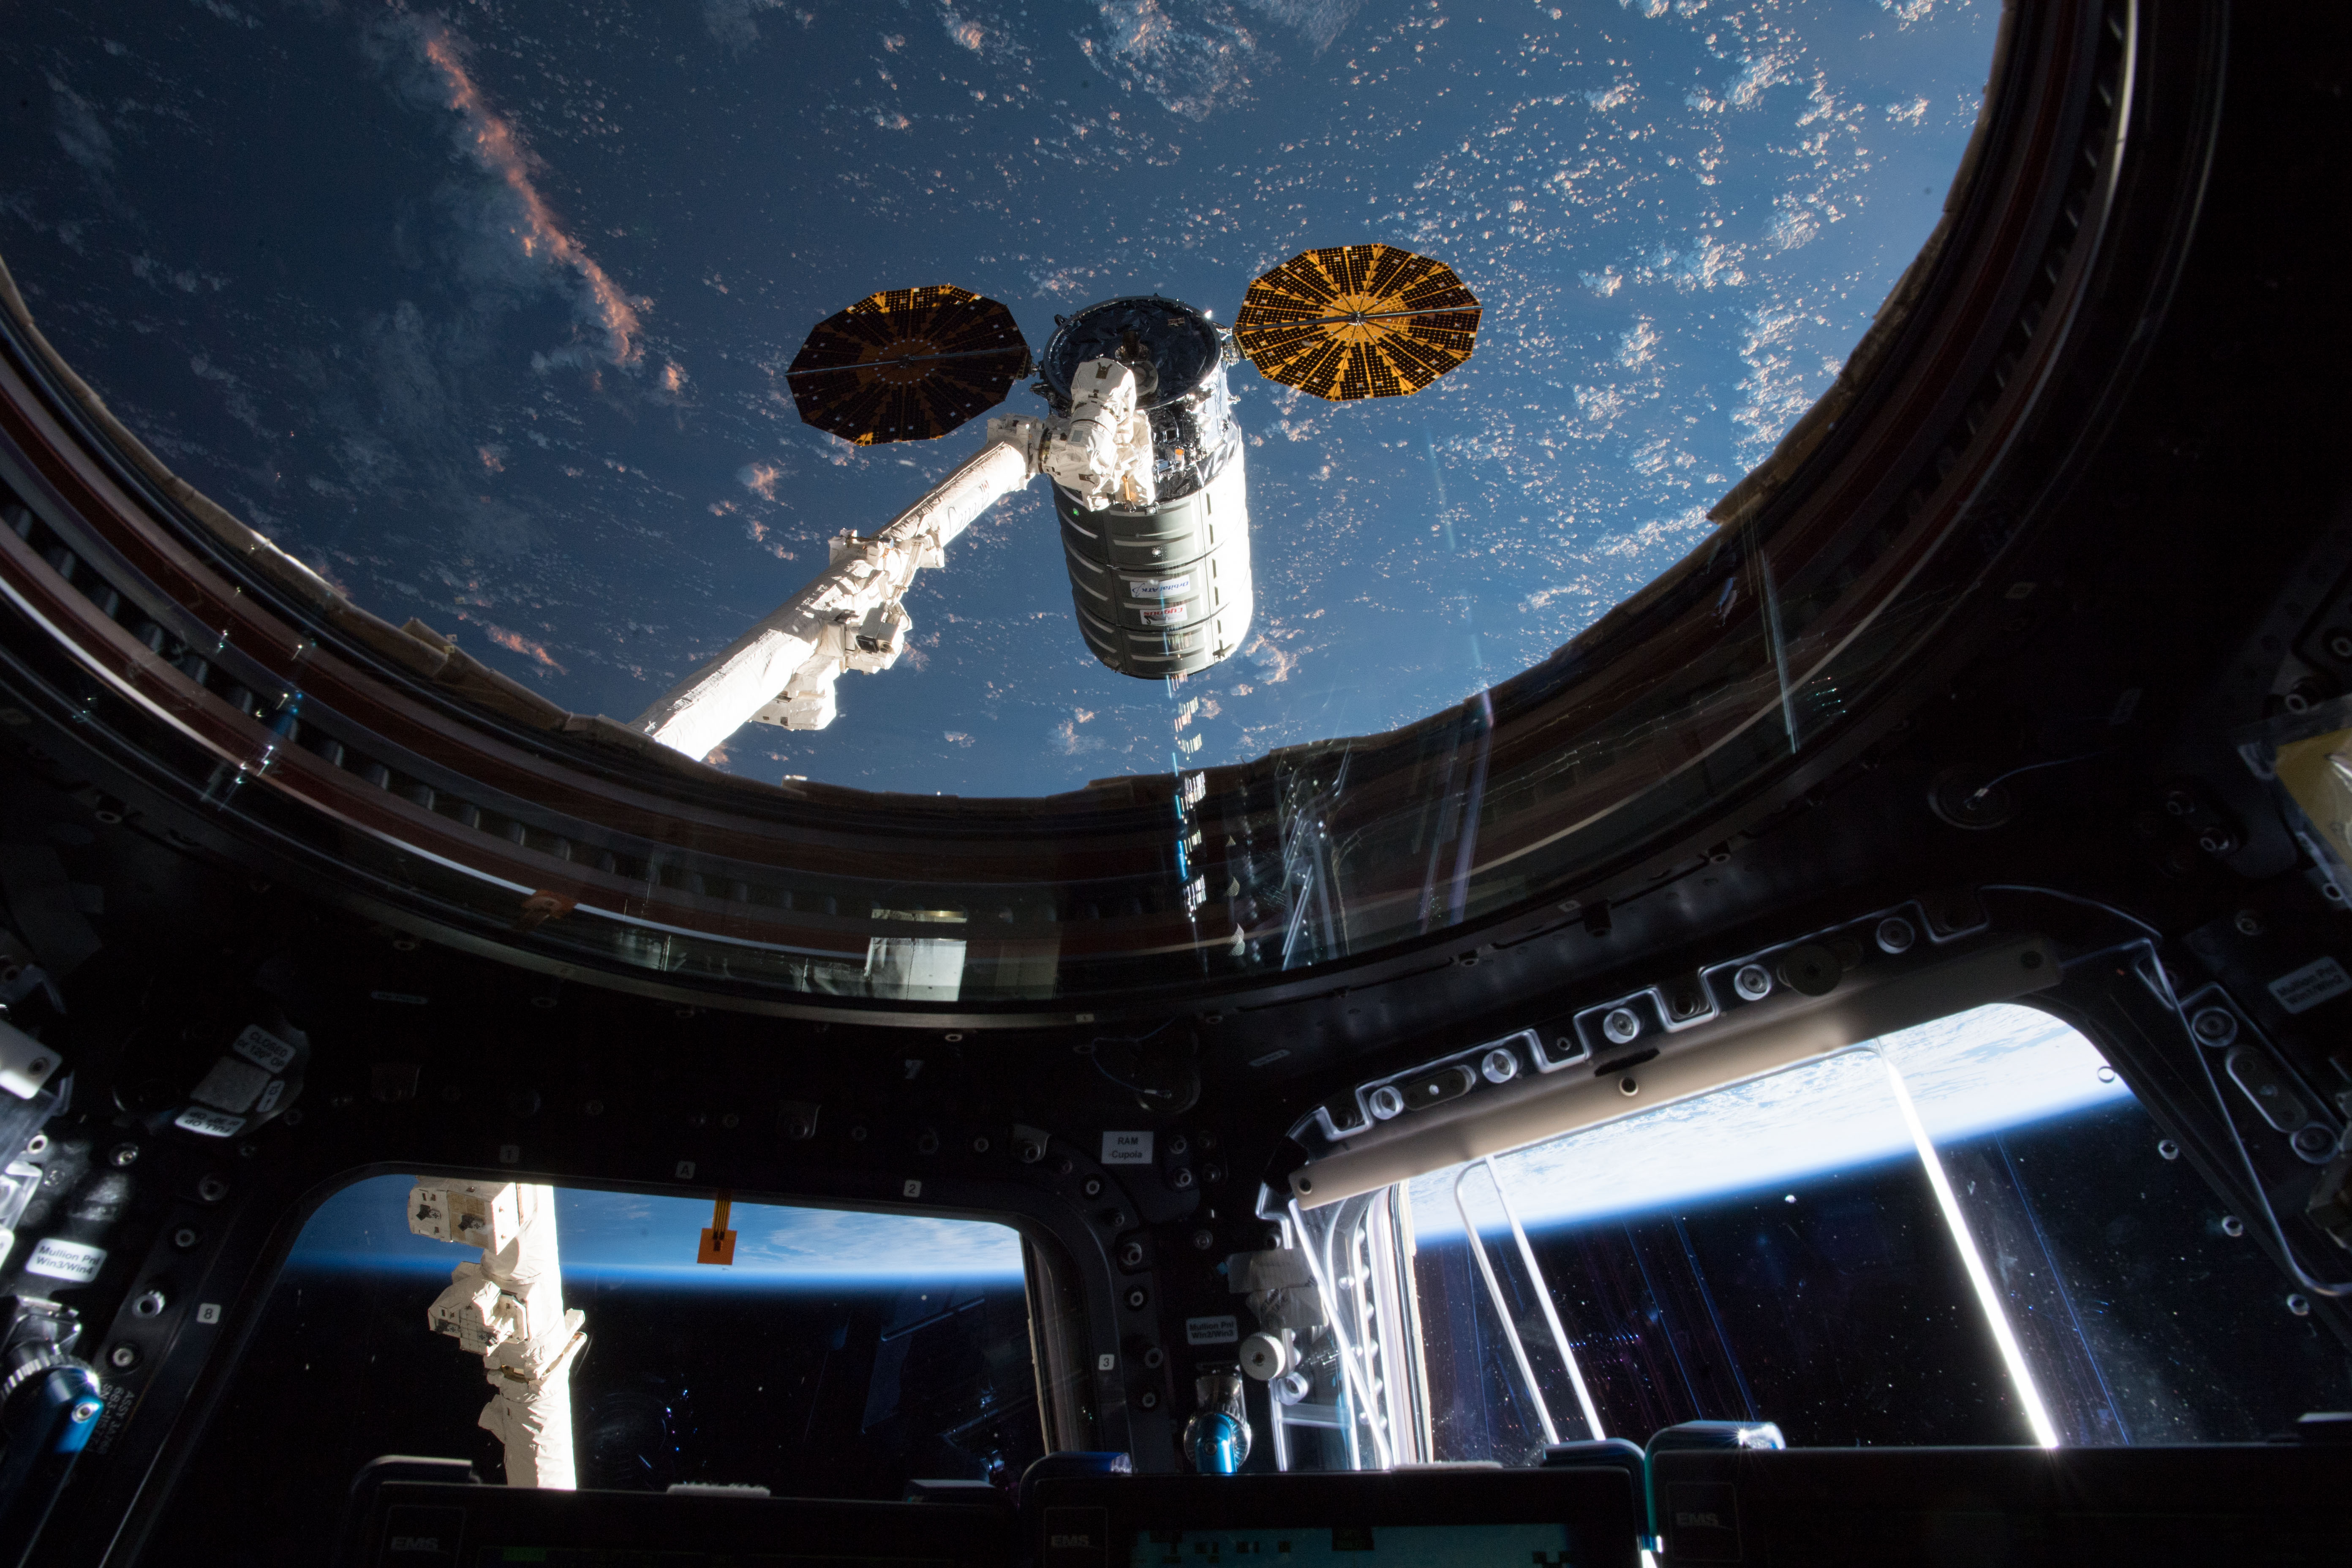 This view taken from inside the cupola shows the Orbital ATK space freighter moments before it was grappled with the Canadarm2 robotic arm.